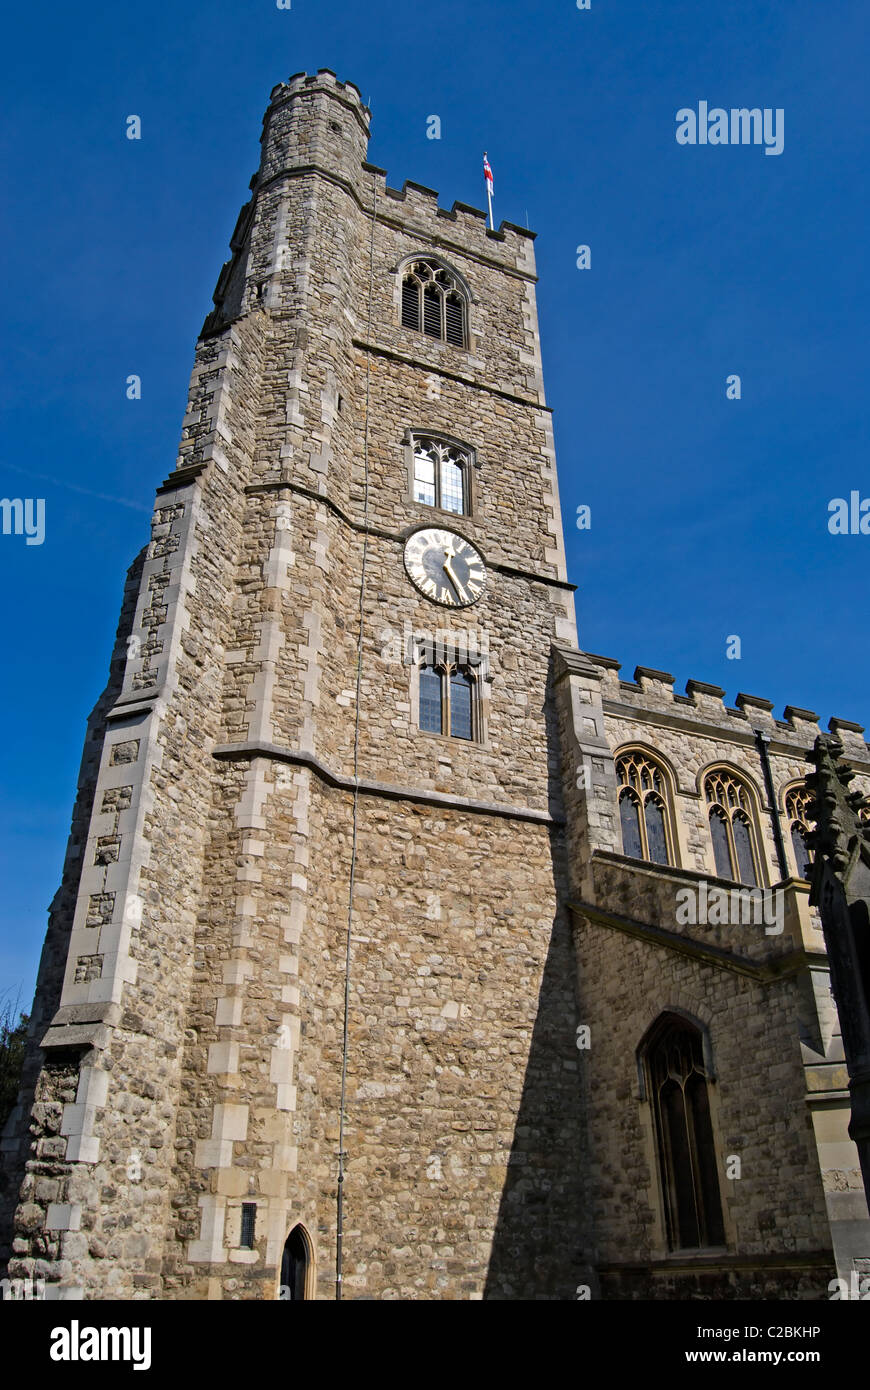 the 15th century tower of all saints church, fulham, london, england Stock Photo